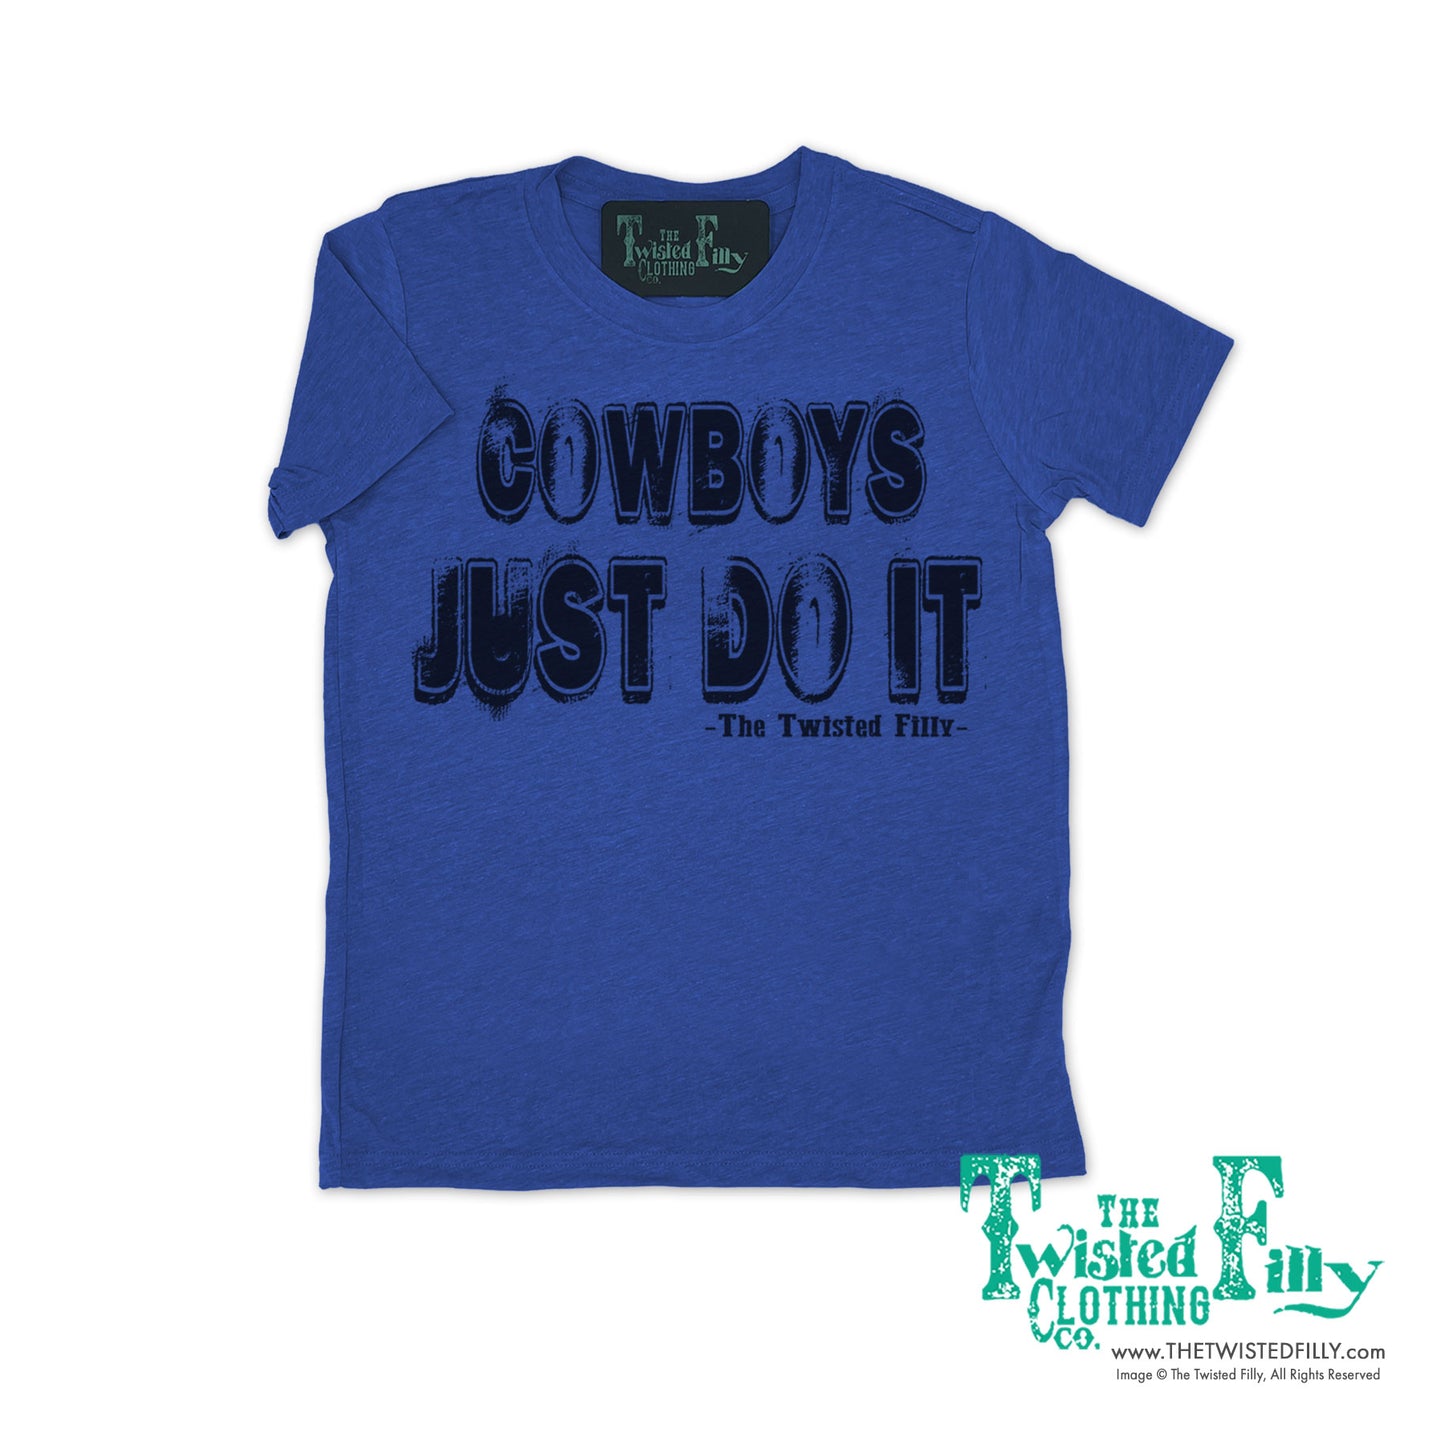 Cowboys Just Do It - S/S Mens Crew Neck Adult Tee - Assorted Colors